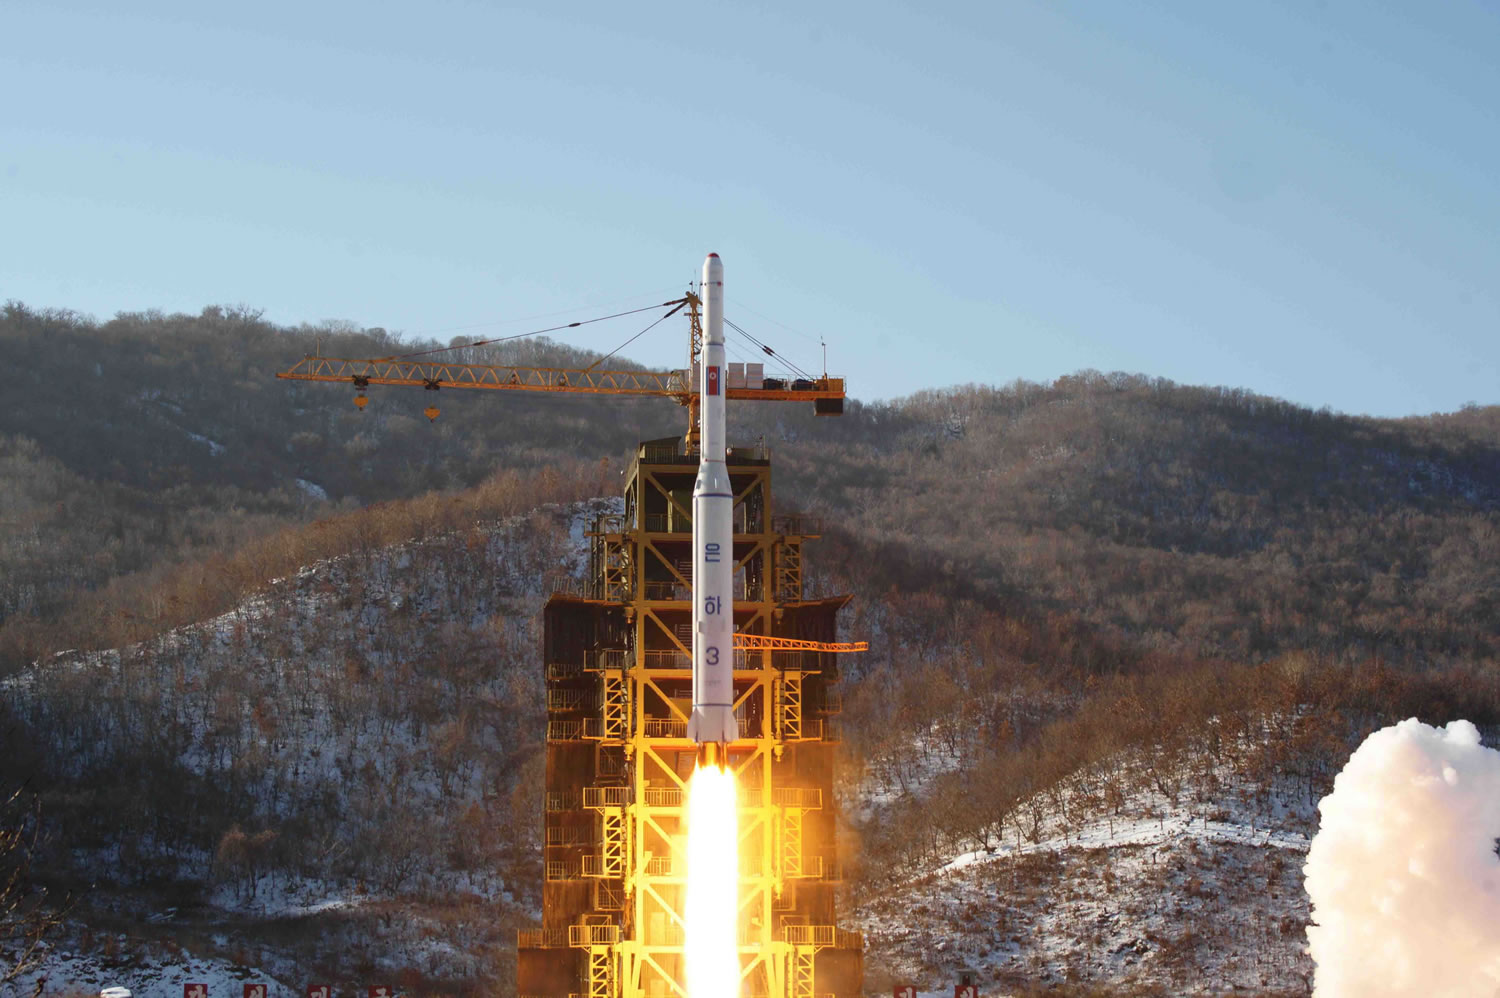 North Korea's Unha-3 rocket lifts off from the Sohae launch pad in Tongchang-ri, North Korea, on Dec. 12, 2012. Though it remains a highly unlikely scenario, Japanese officials have long feared that if North Korea ever decides to play its nuclear card it has not only the means but several potential motives for launching an attack on Tokyo or major U.S.